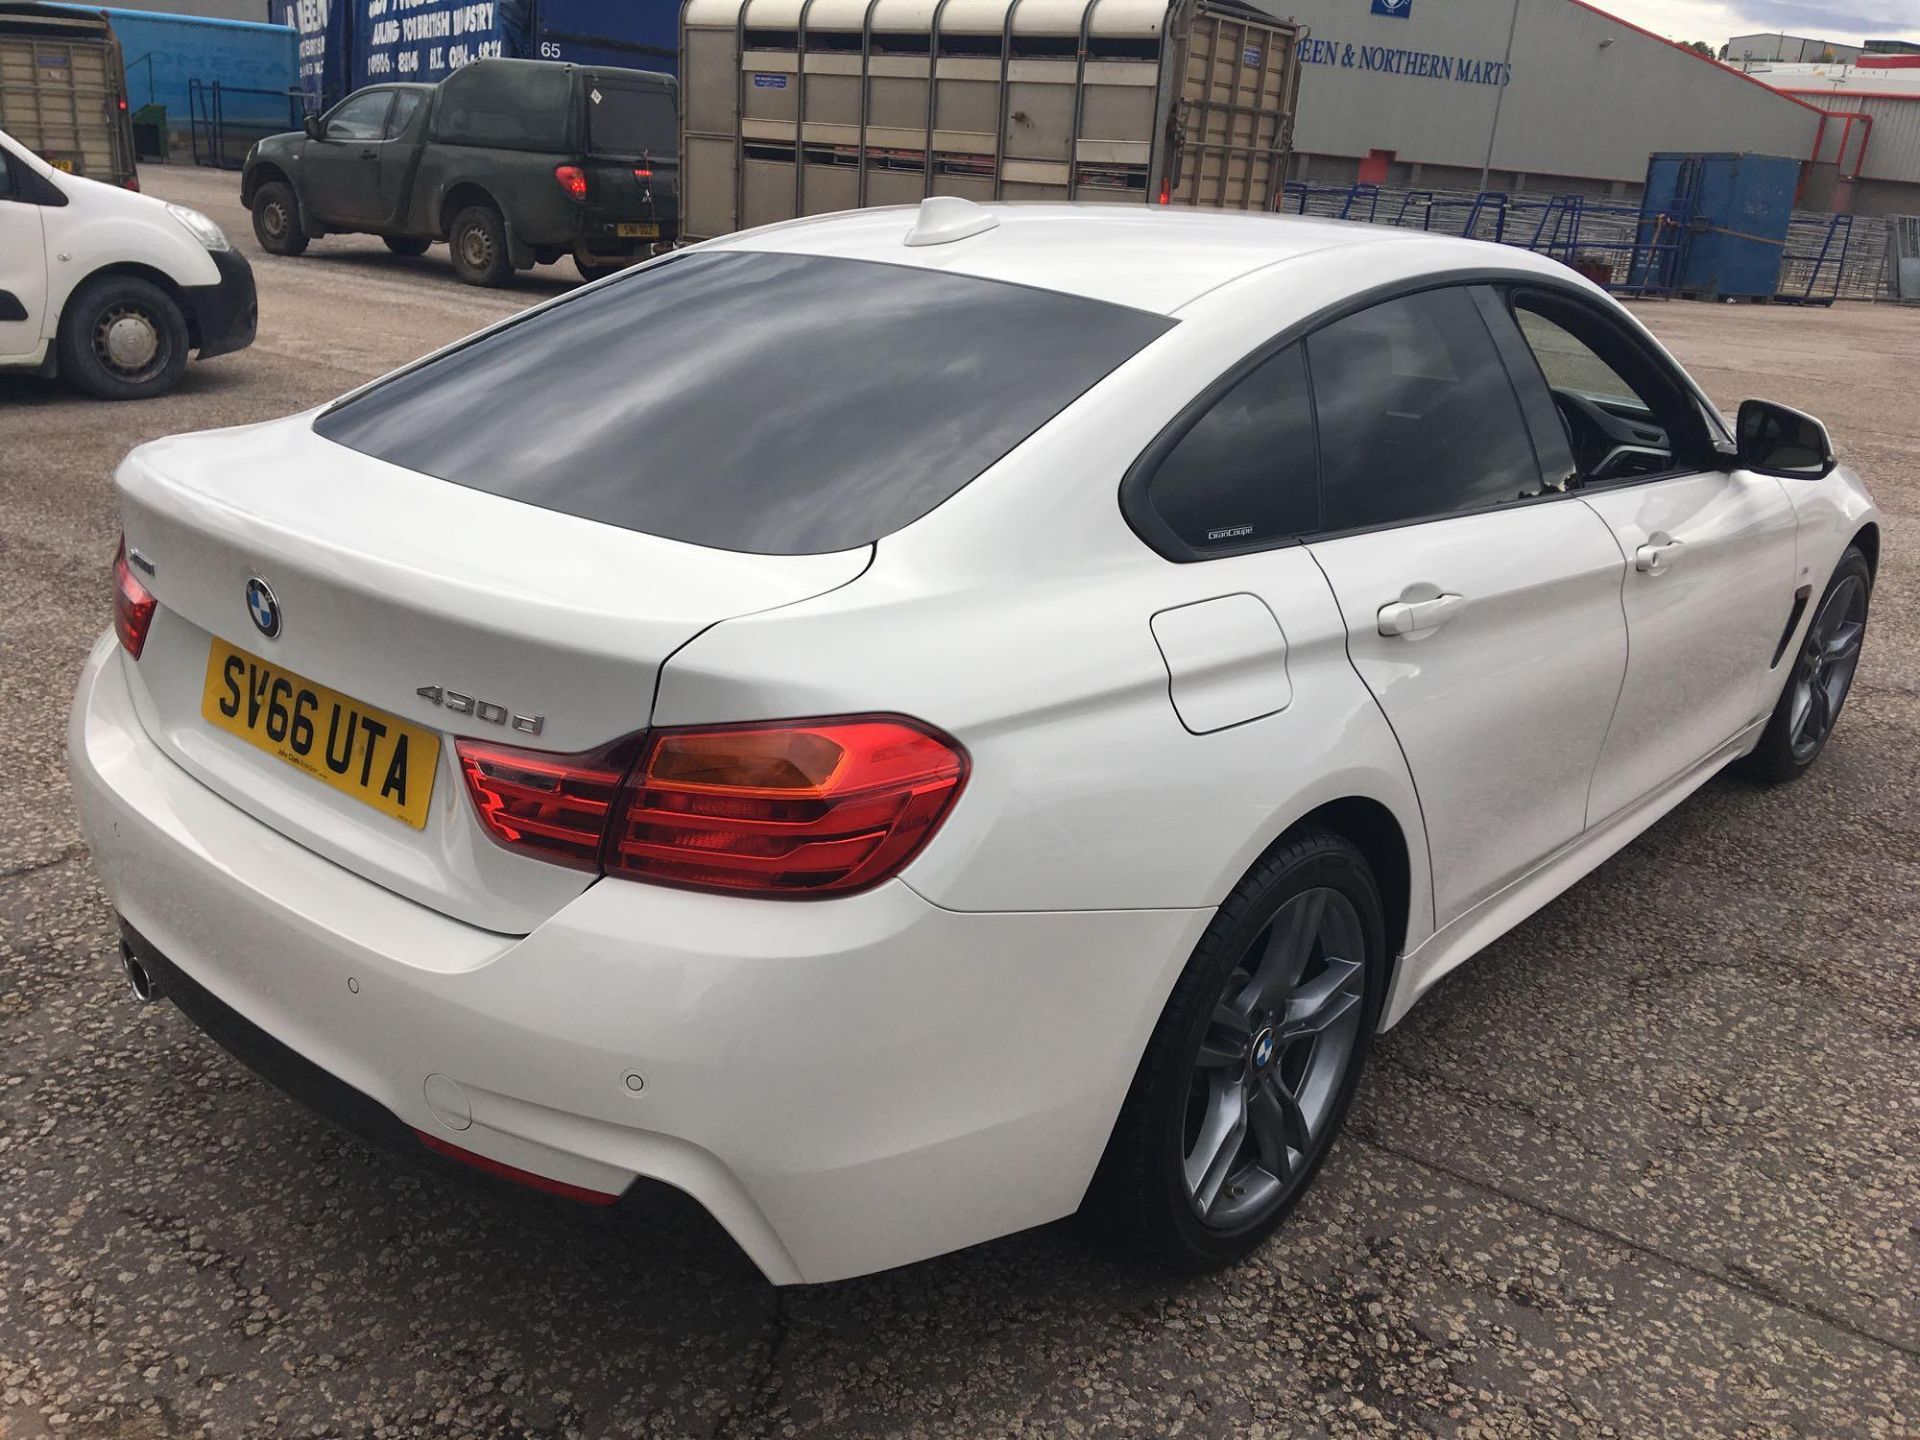 Bmw 430d Xdrive Grancoupe M Sport - 2993cc 5 Door Coupe - Image 4 of 6